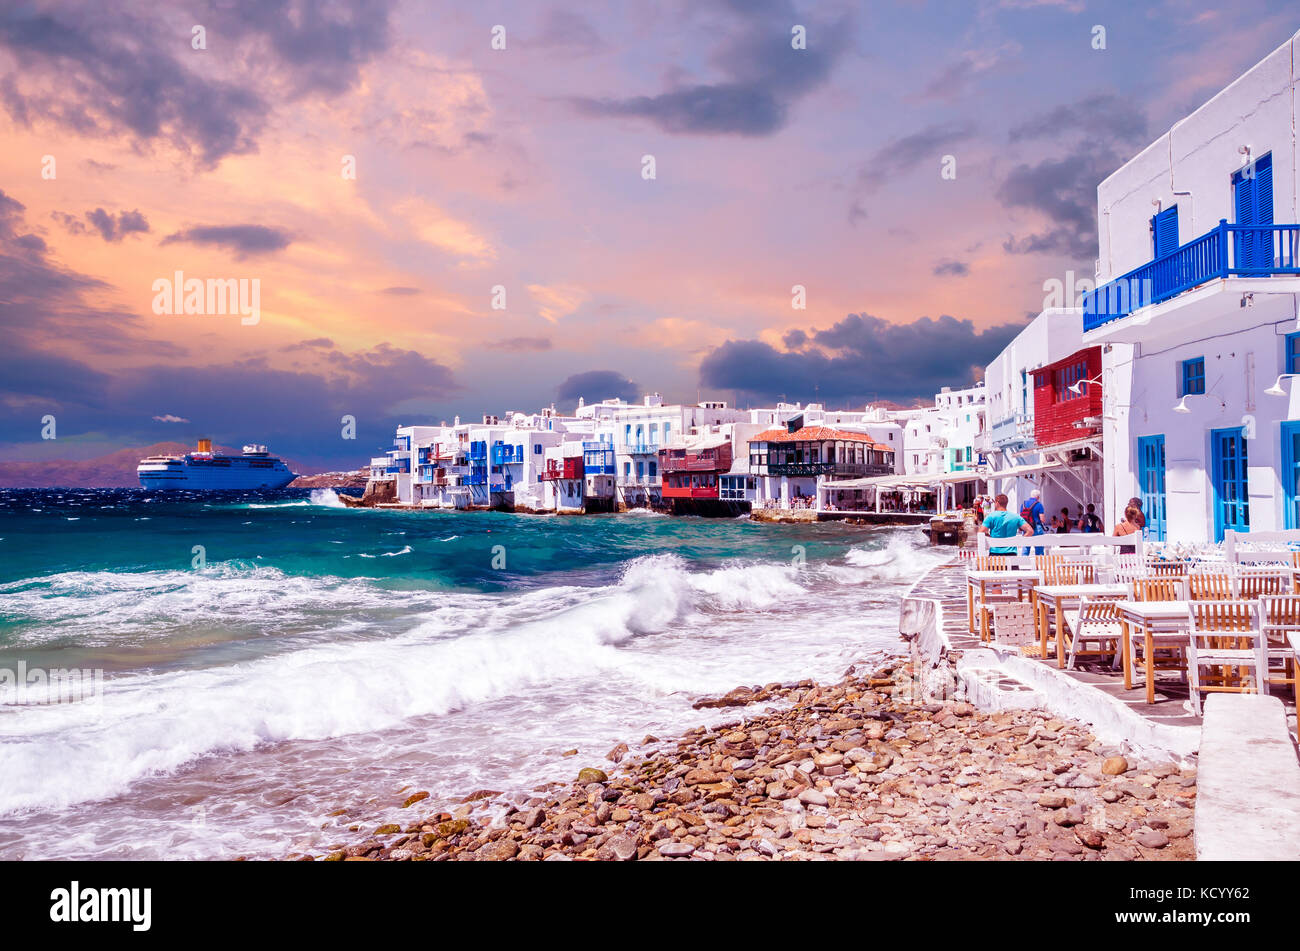 Little Venice, Mykonos island, Greece. Colorful buildings and balconies near the sea and a large white cruise ship. Stock Photo